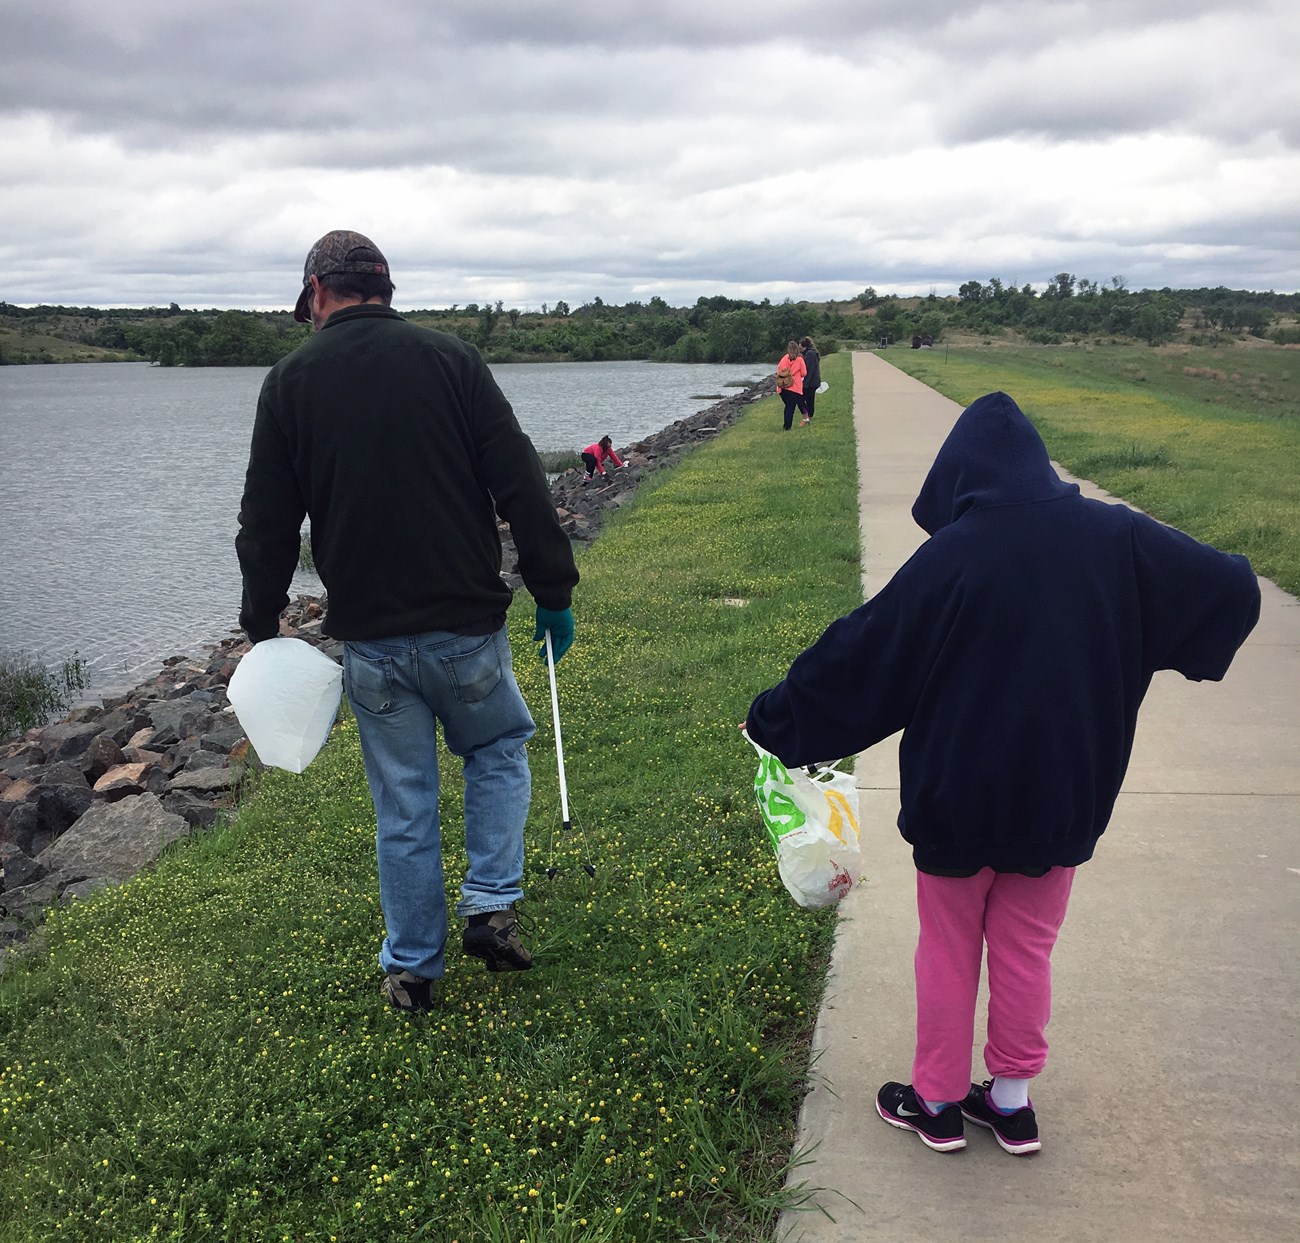 A man holding trash tongs walks along a sidewalk near a lake. To his right is a girl putting trash into a bag. Several more people are in the background picking up litter.